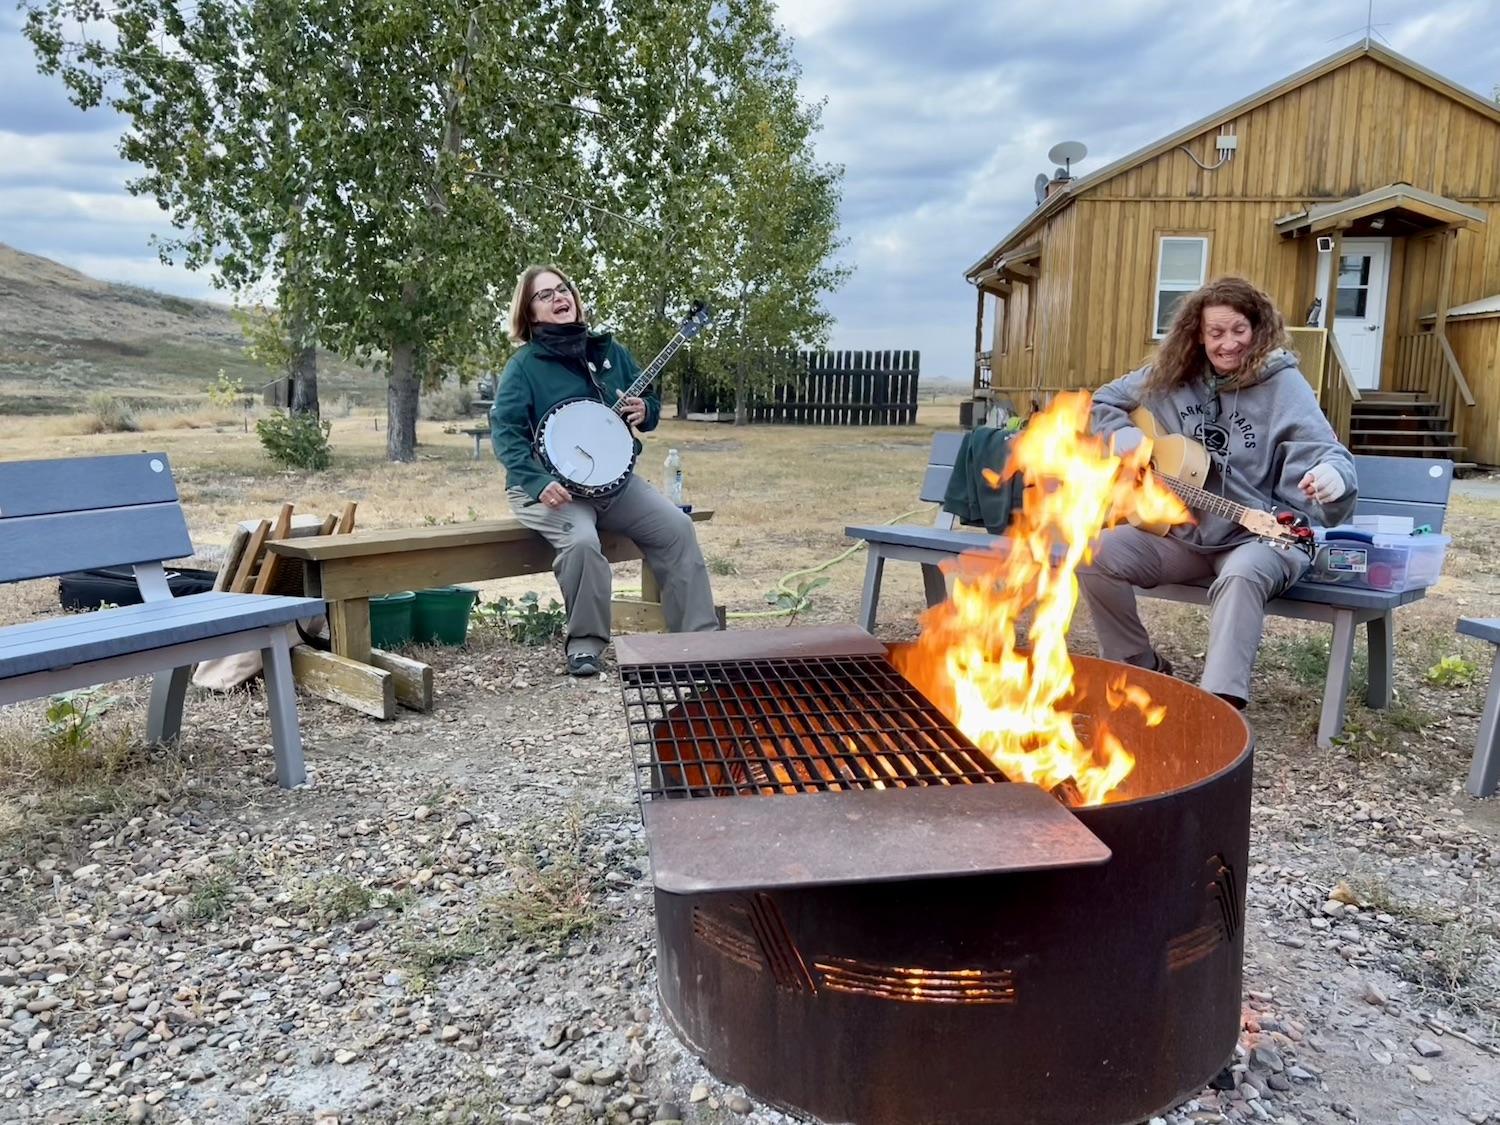 Parks Canada's Brenda Peterson, left, and Corelie Keller, lead a fireside chat at Rock Creek Campground.